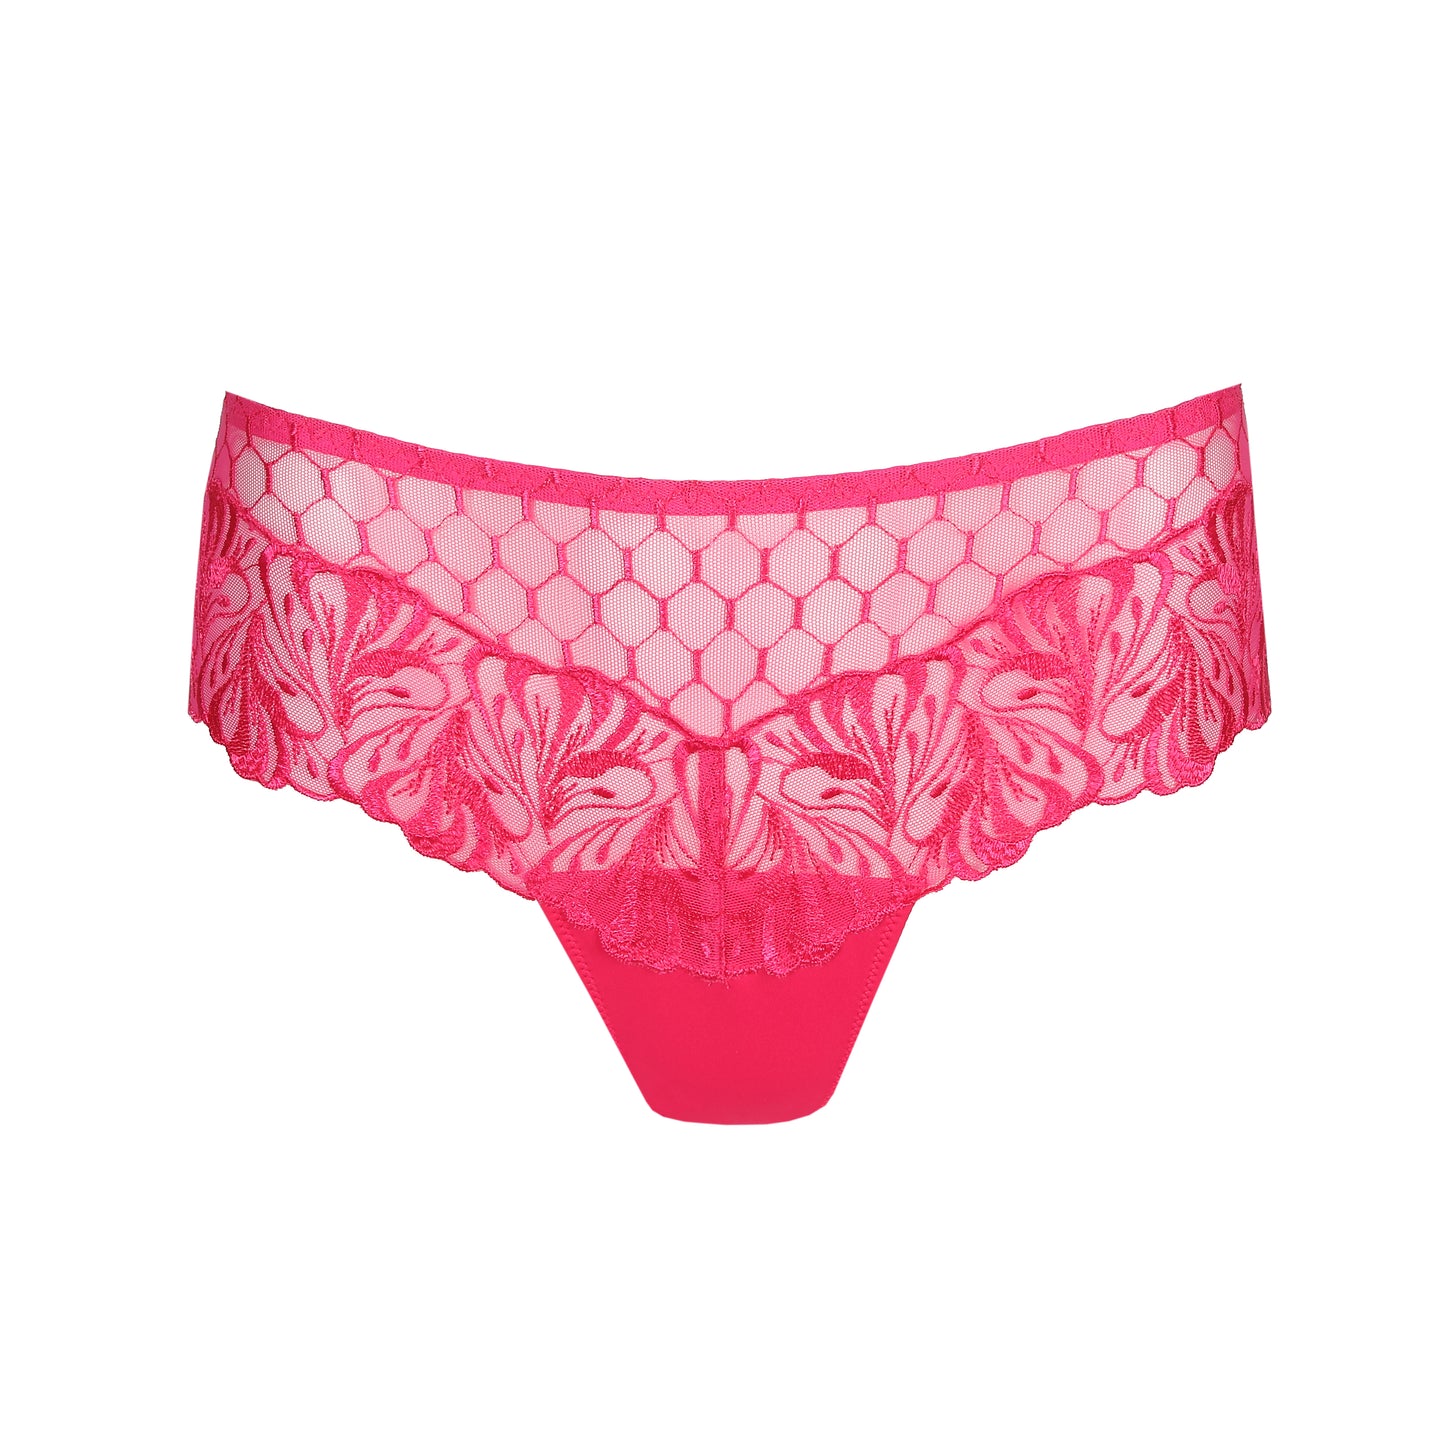 PrimaDonna Disah luxe string electric pink